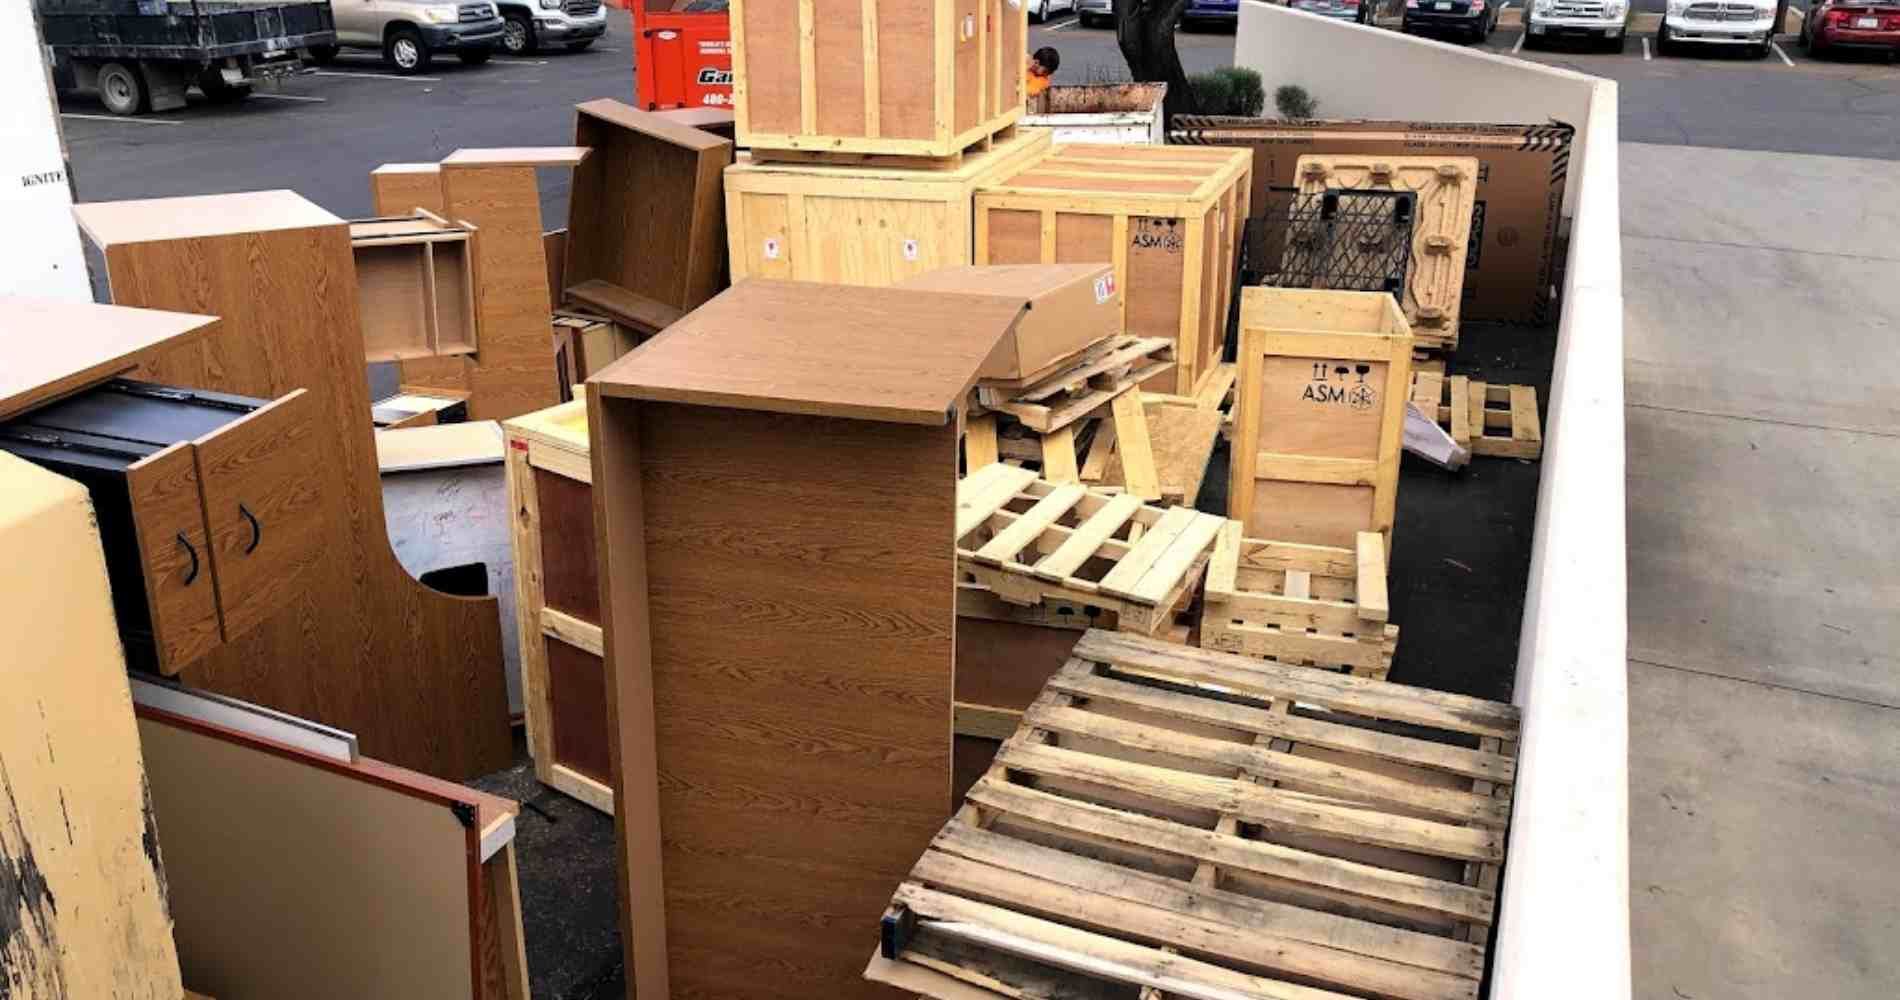 #1 for Pallet Disposal in Goodyear, AZ With Over 1200 5-Star Reviews!